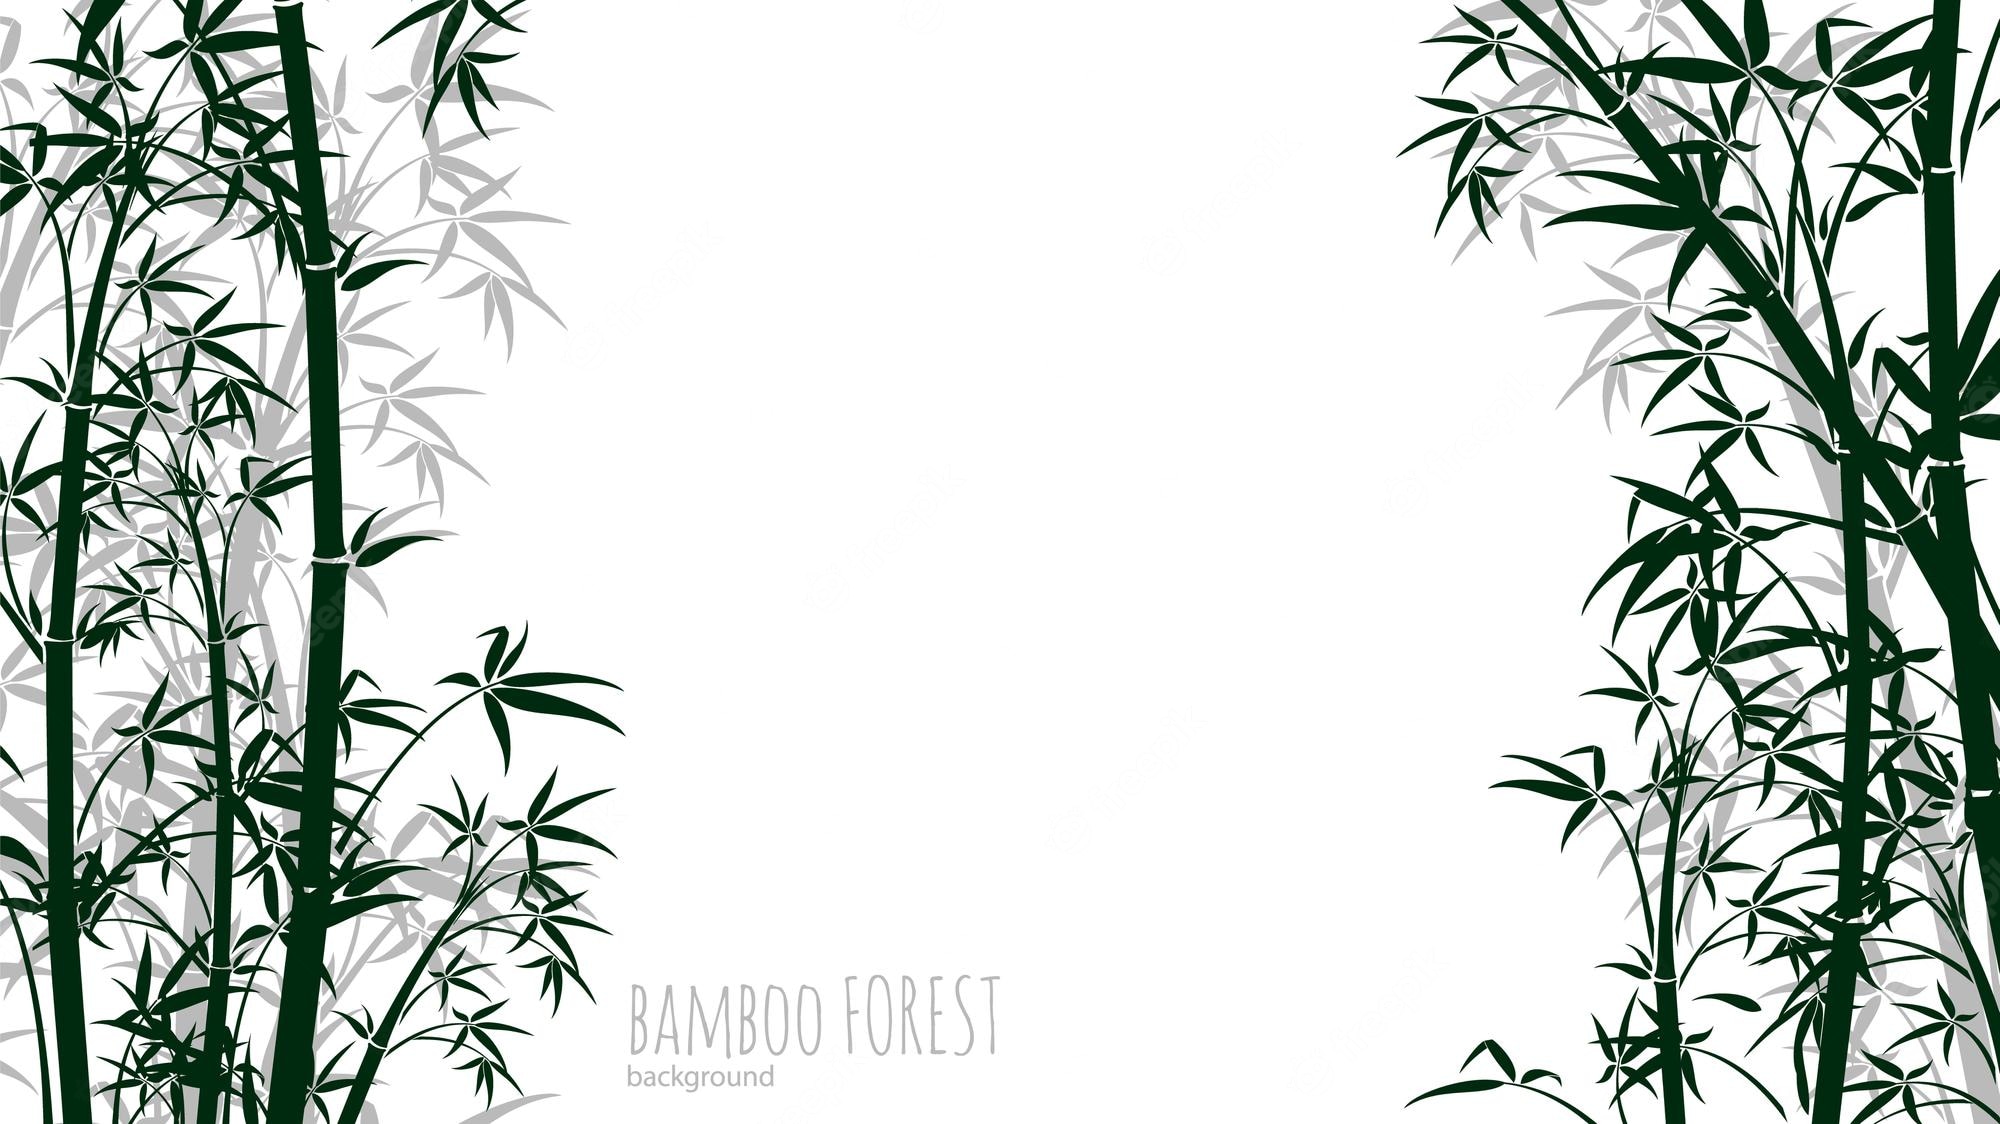 Premium Vector Bamboo Forest Background Chinese Japanese